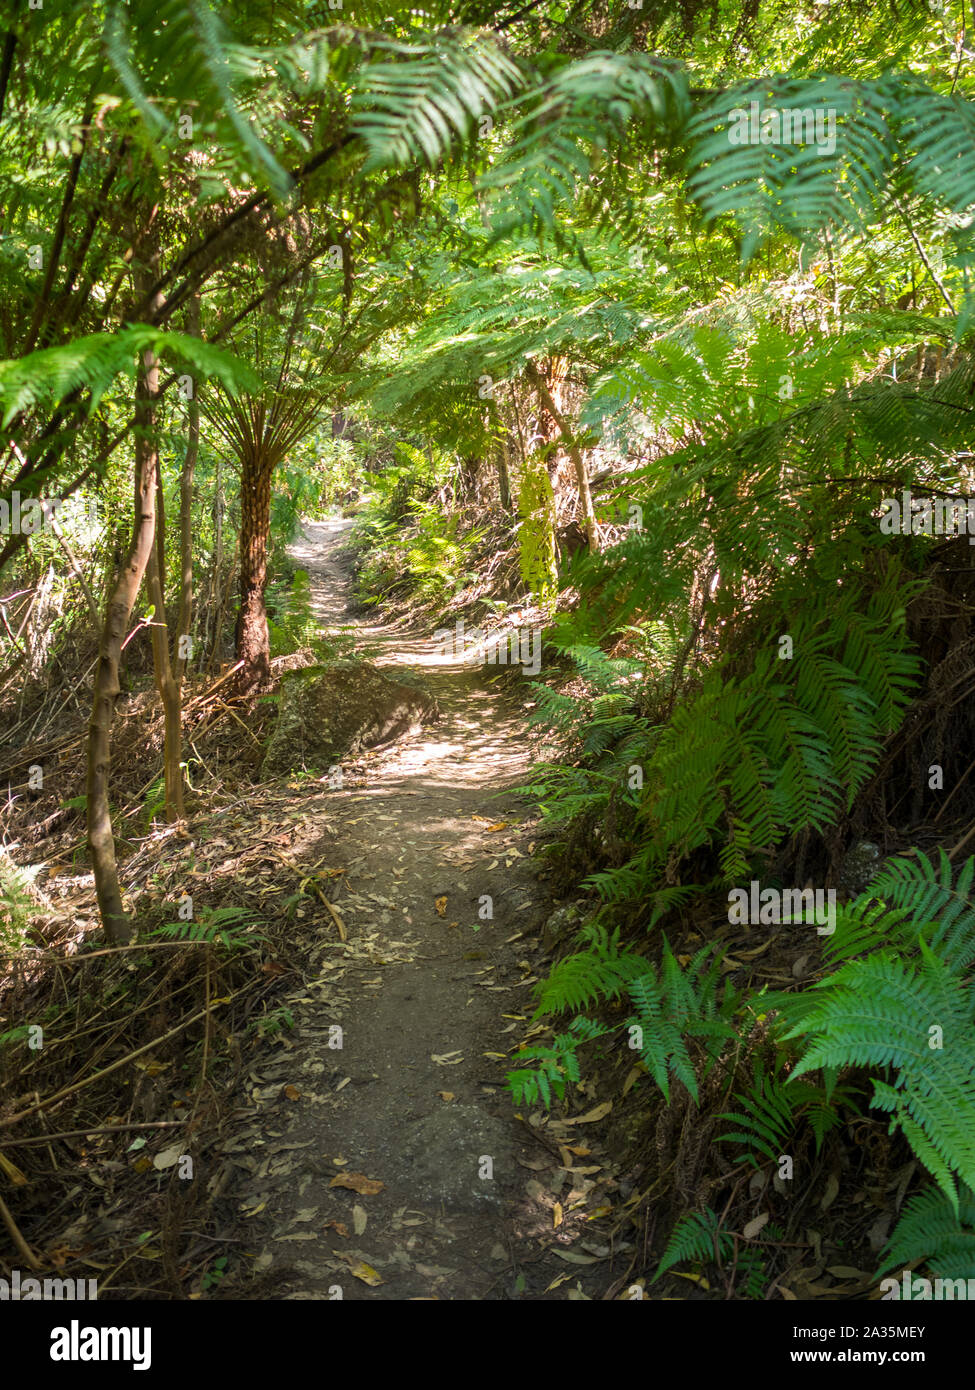 Dirt track of Lilly Pilly Gully Circuit, Wilsons Promontory, Victoria, Australia Stock Photo